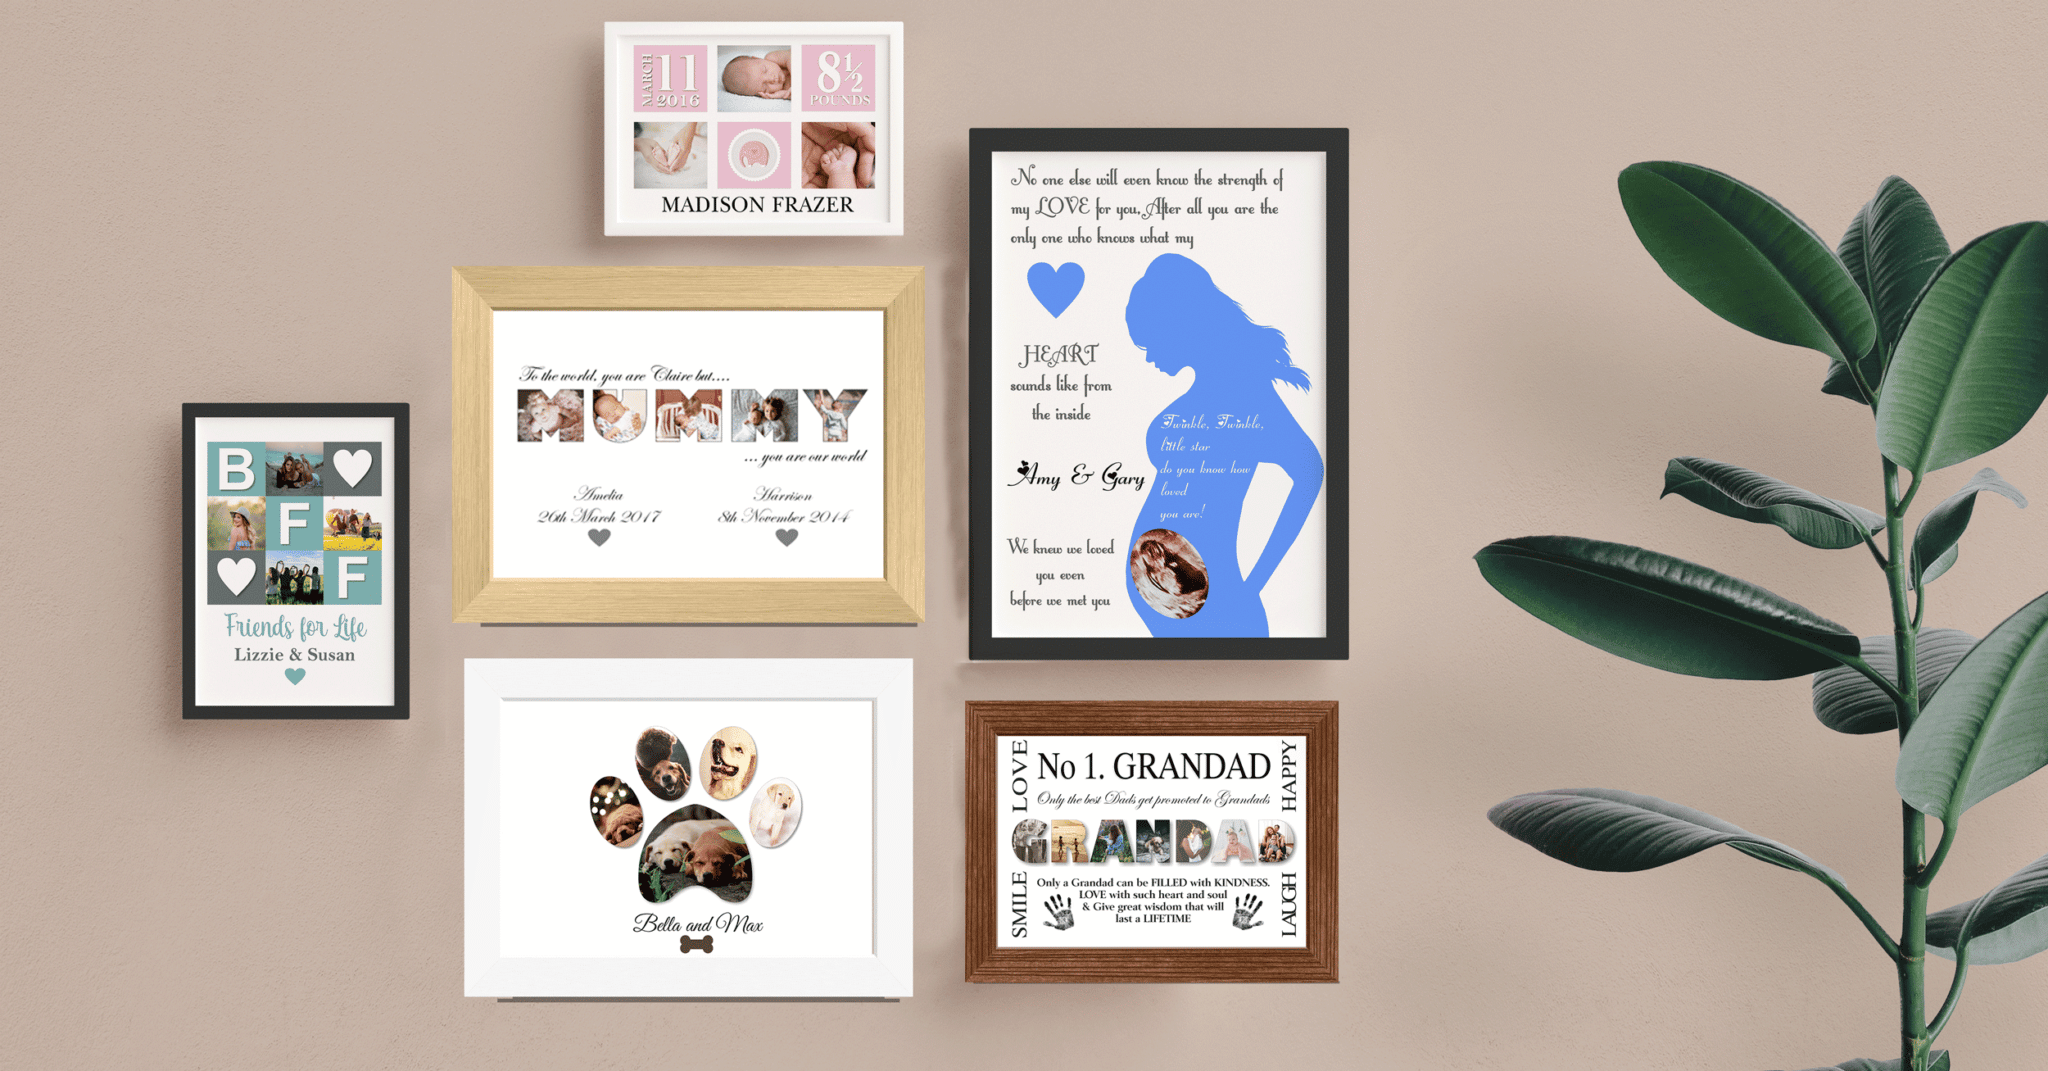 Personalised First Year Anniversary Gift Anniversary Gifts